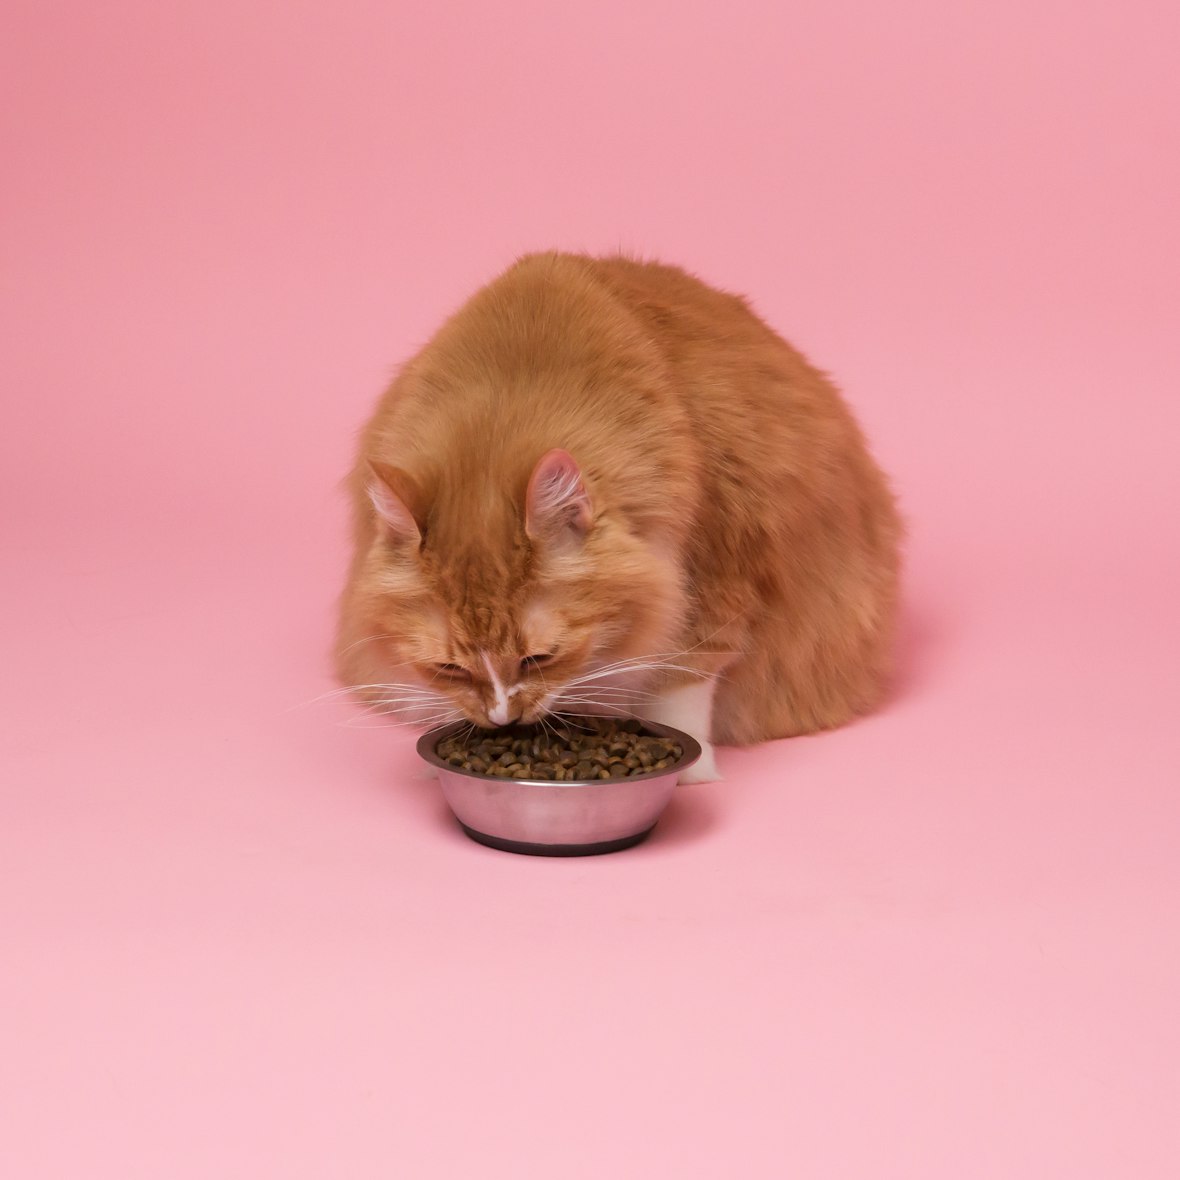 Even when indoor cats eat regularly, like this one feasting on kibble against a pink background, they still hunt wild birds and other animals.